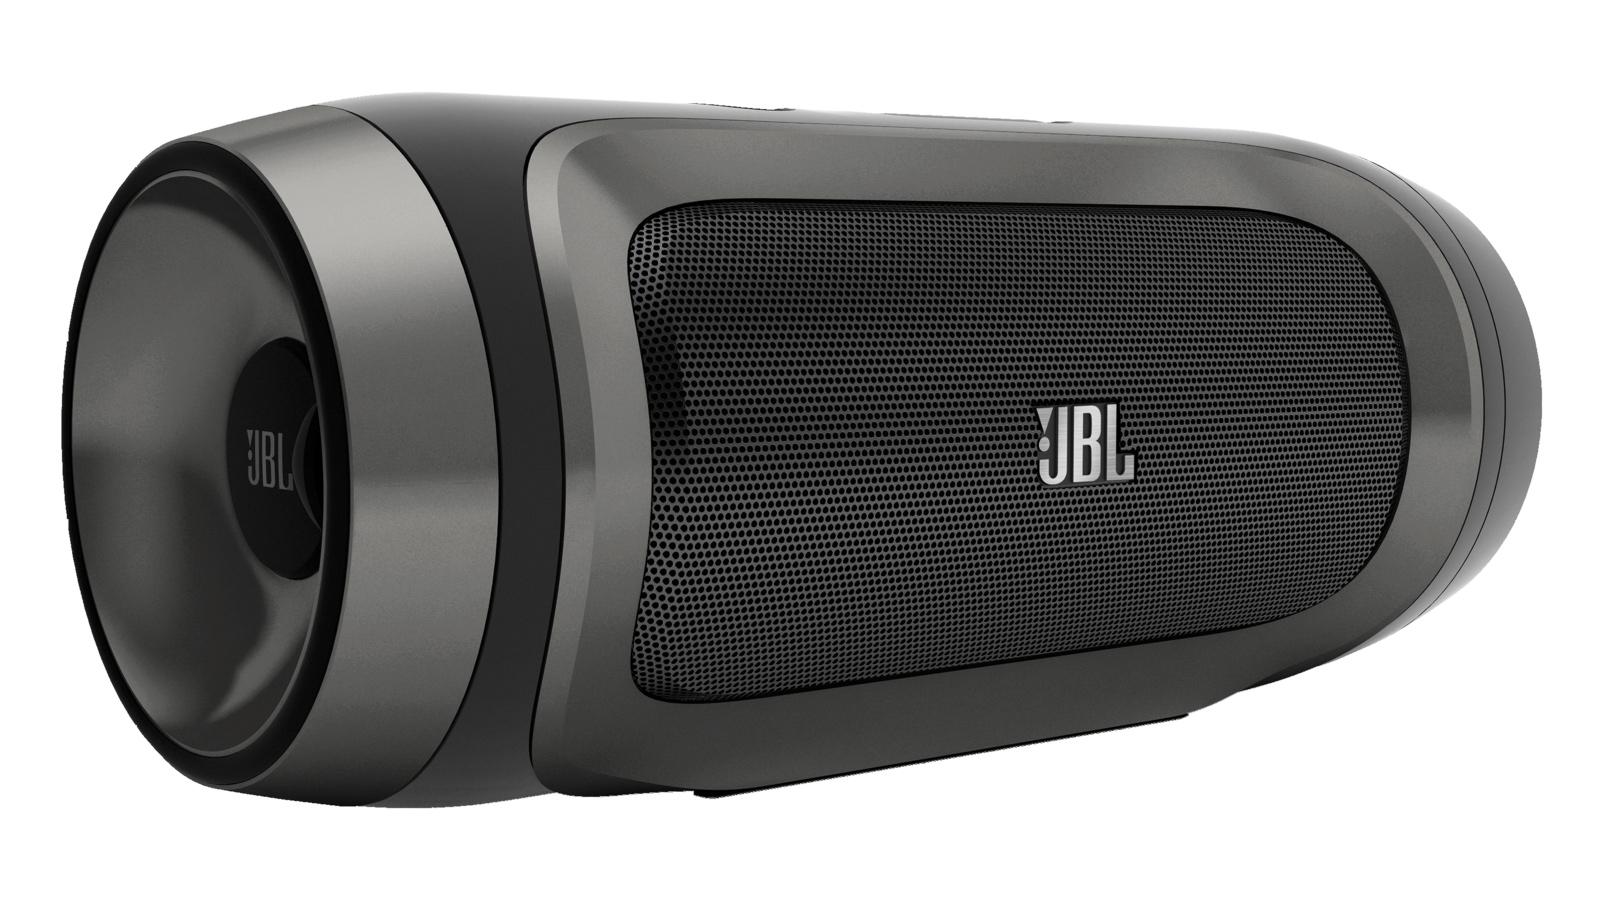 JBL CHARGE Photo, Image and Wallpaper